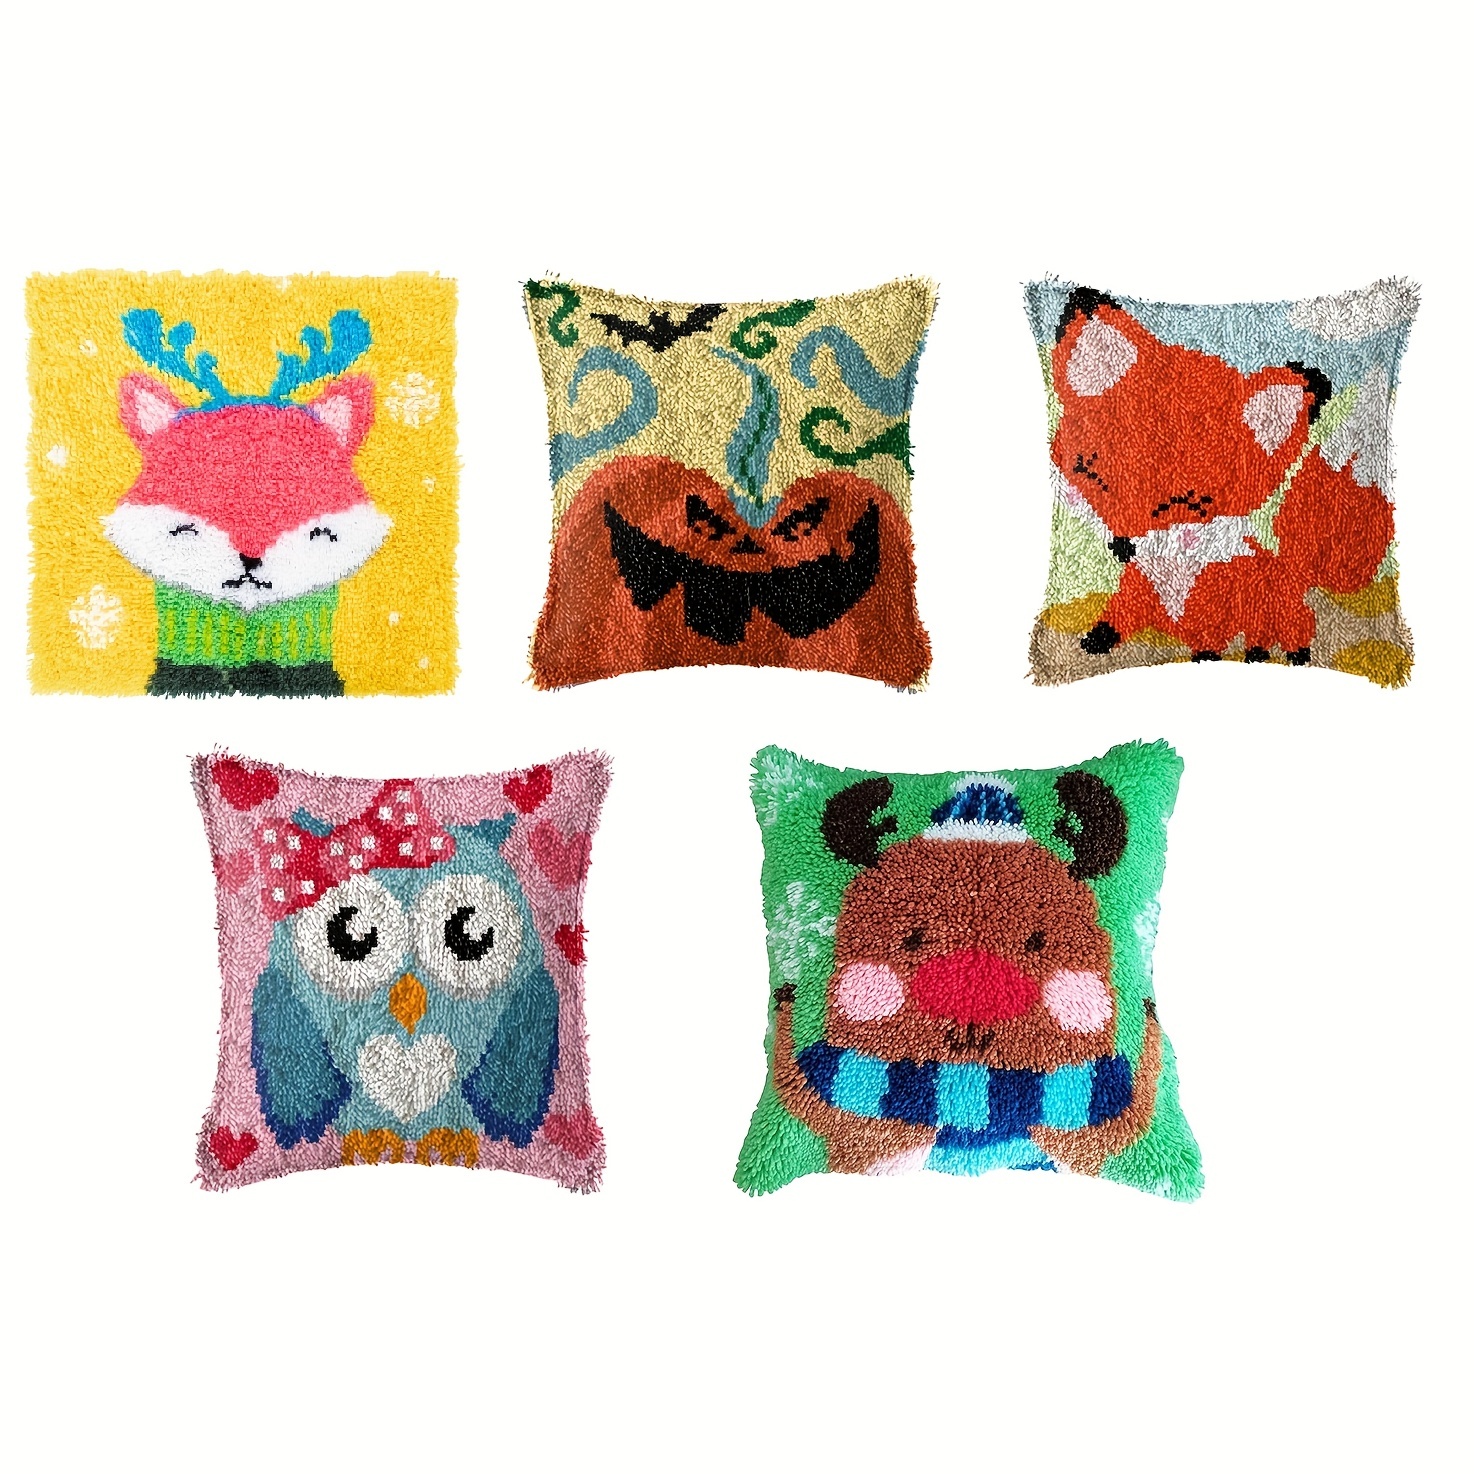 5-Piece Owl Latch Hook Pillow Kit, Rug Hooking Kits for Adult Kids  Beginners, DIY Crafts (16 x 16 In)